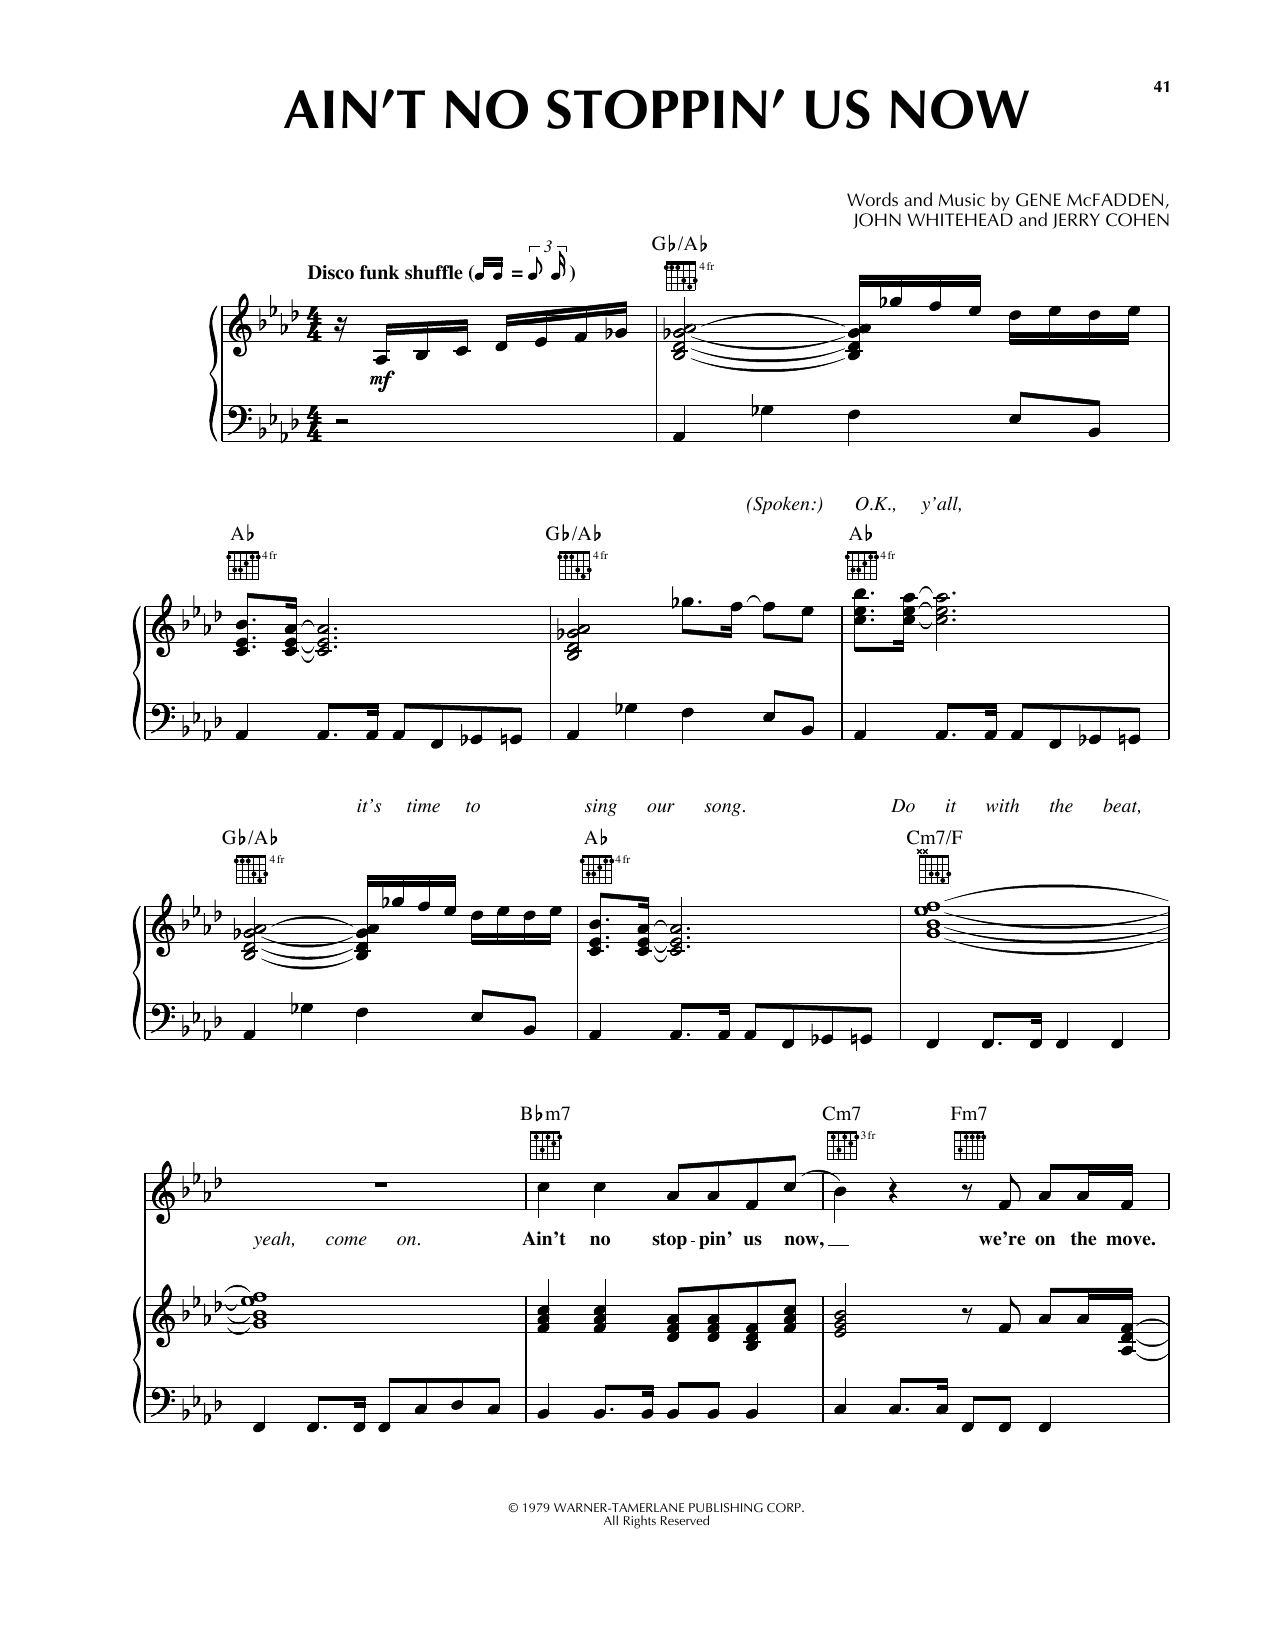 Download Luther Vandross Ain't No Stoppin' Us Now Sheet Music